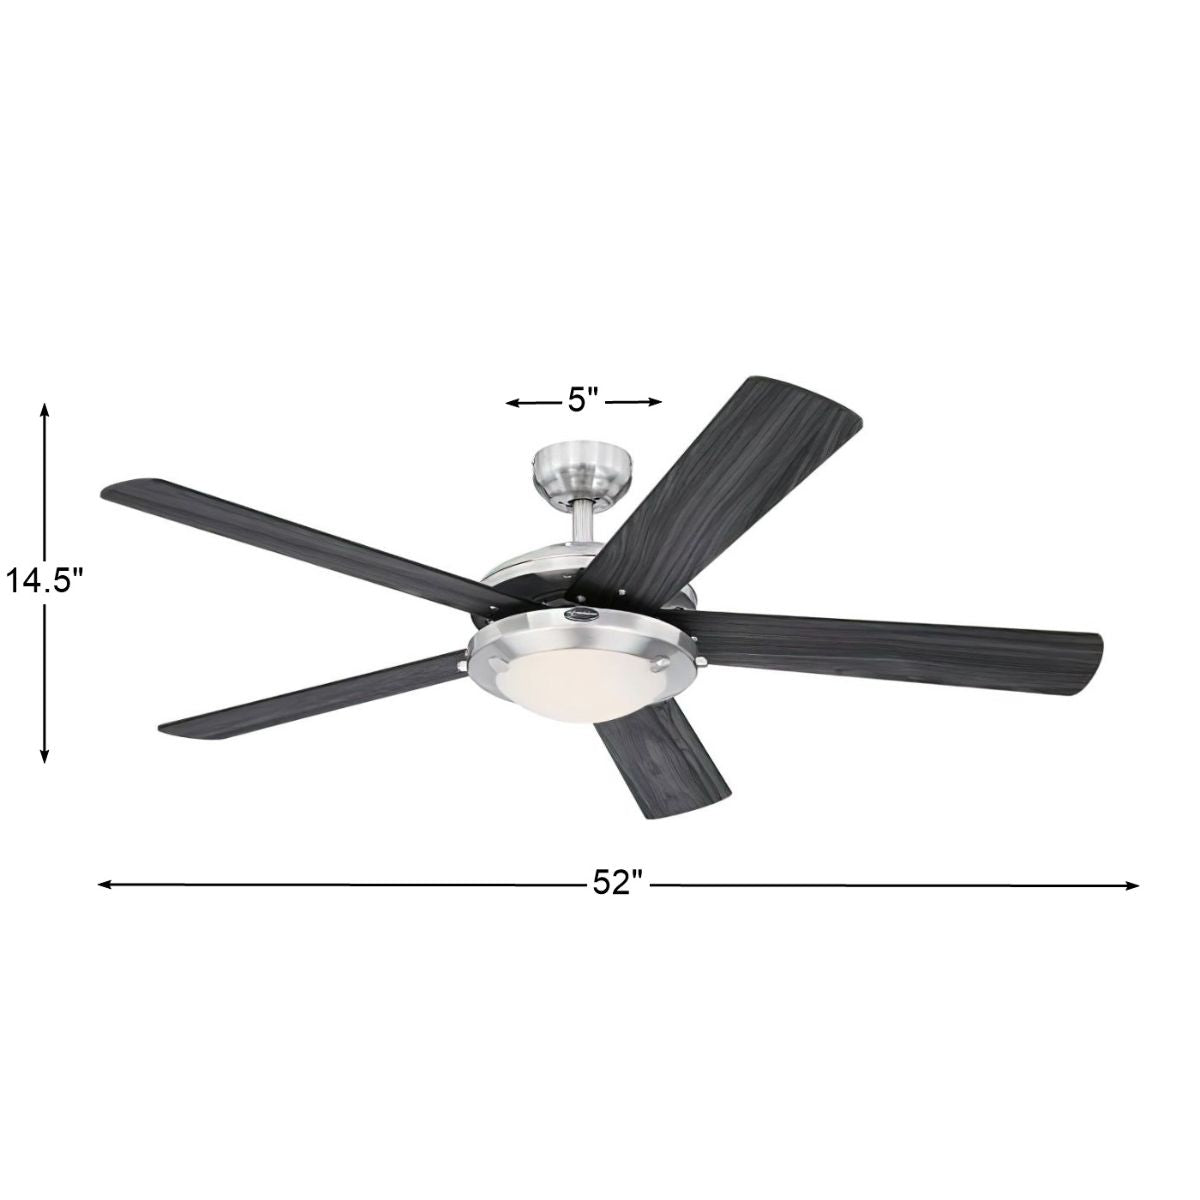 Comet 52 Inch Modern Ceiling Fan With Light And Pull Chain